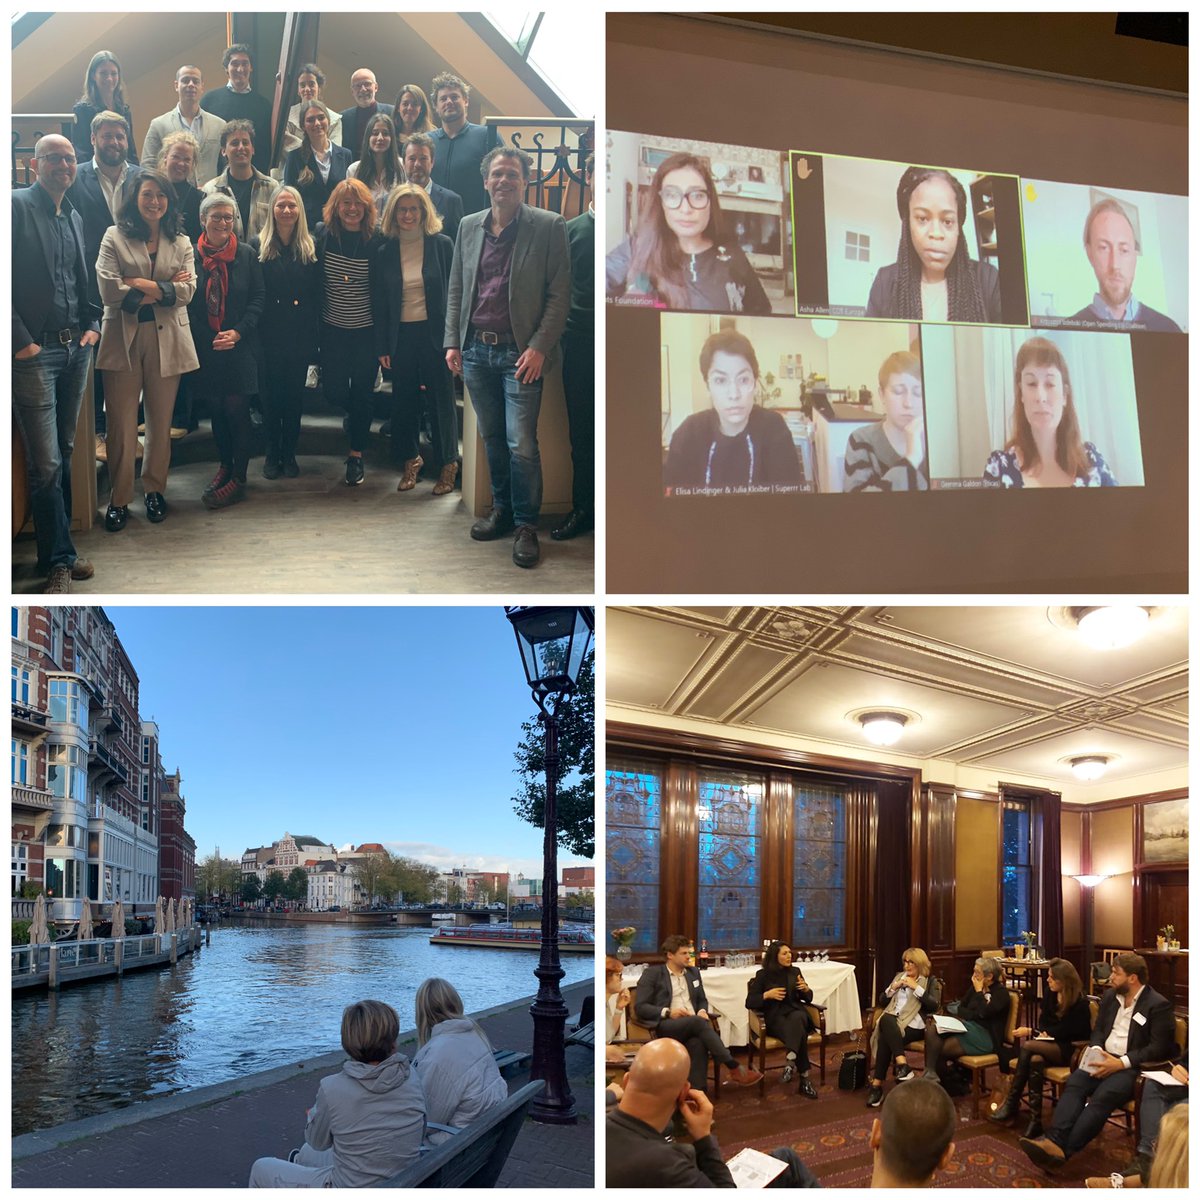 Amsterdam @touriameliani @aikvaneemeren @GerBaron have hosted the 1st political-technical meeting of @CitiesDRights Some thoughts: no digital transformation without digital inclusion and emerging technologies need to be open, sustainable, respectful of diversity and data privacy.